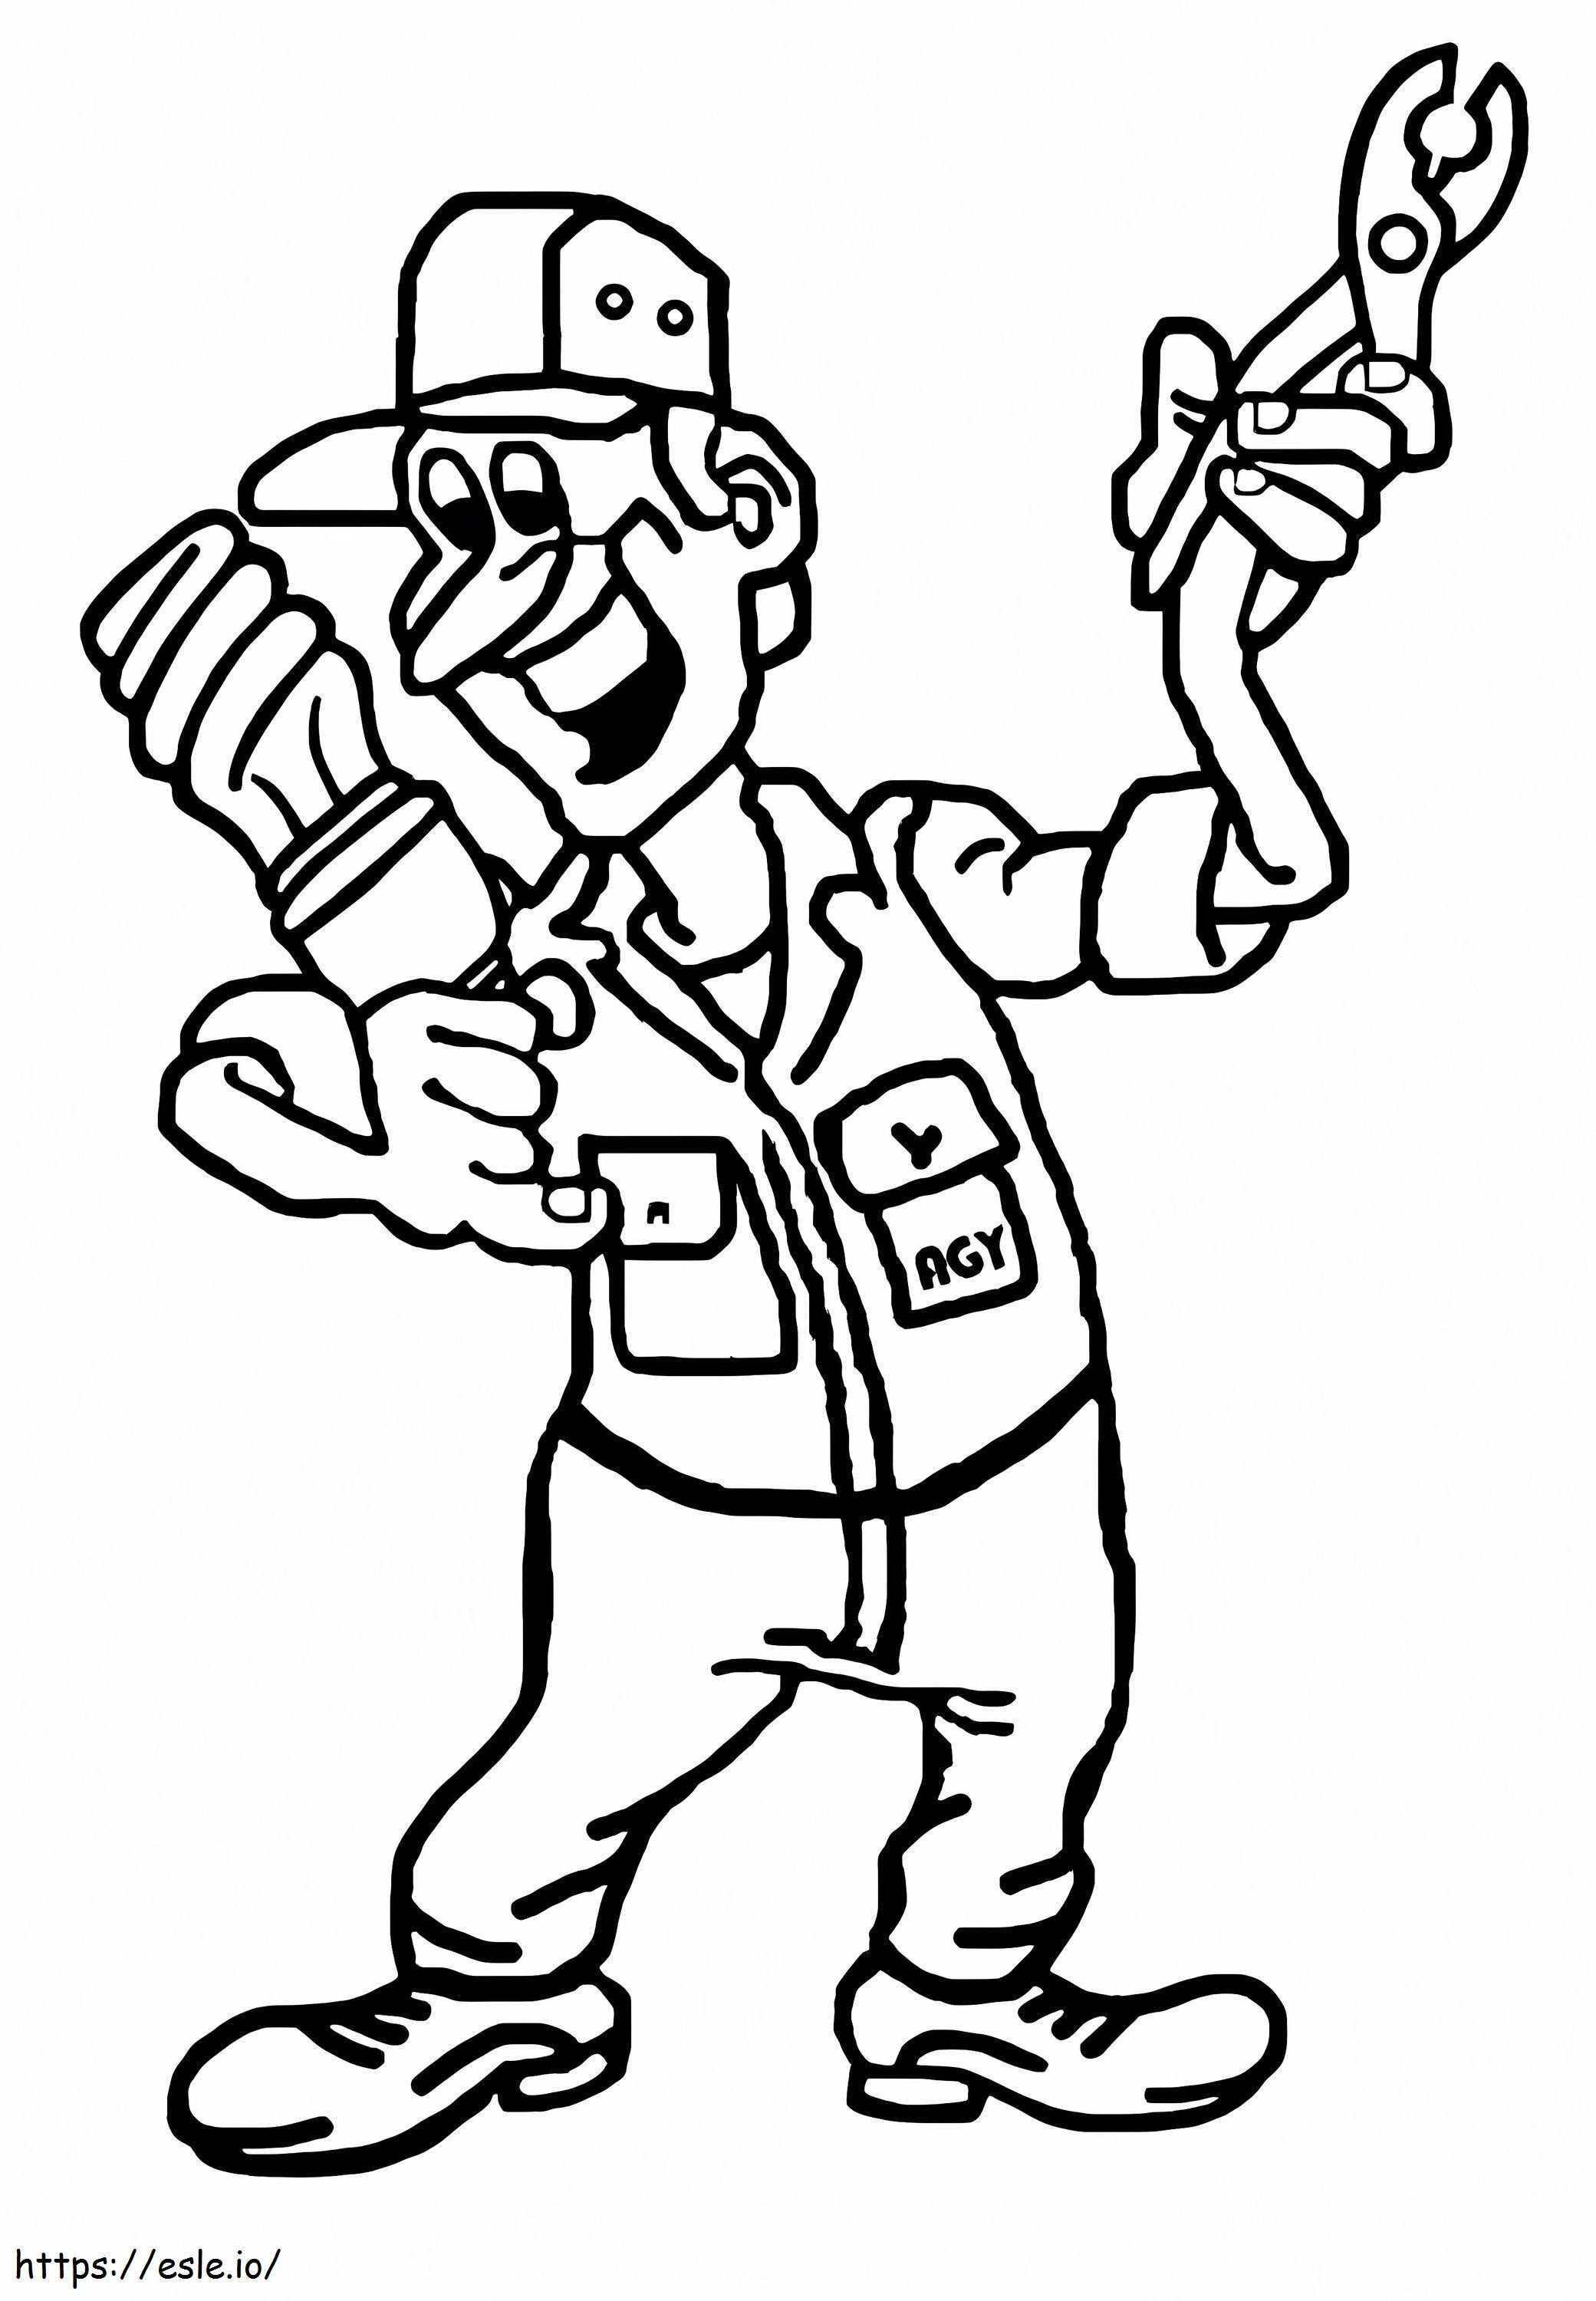 Electrician 11 coloring page